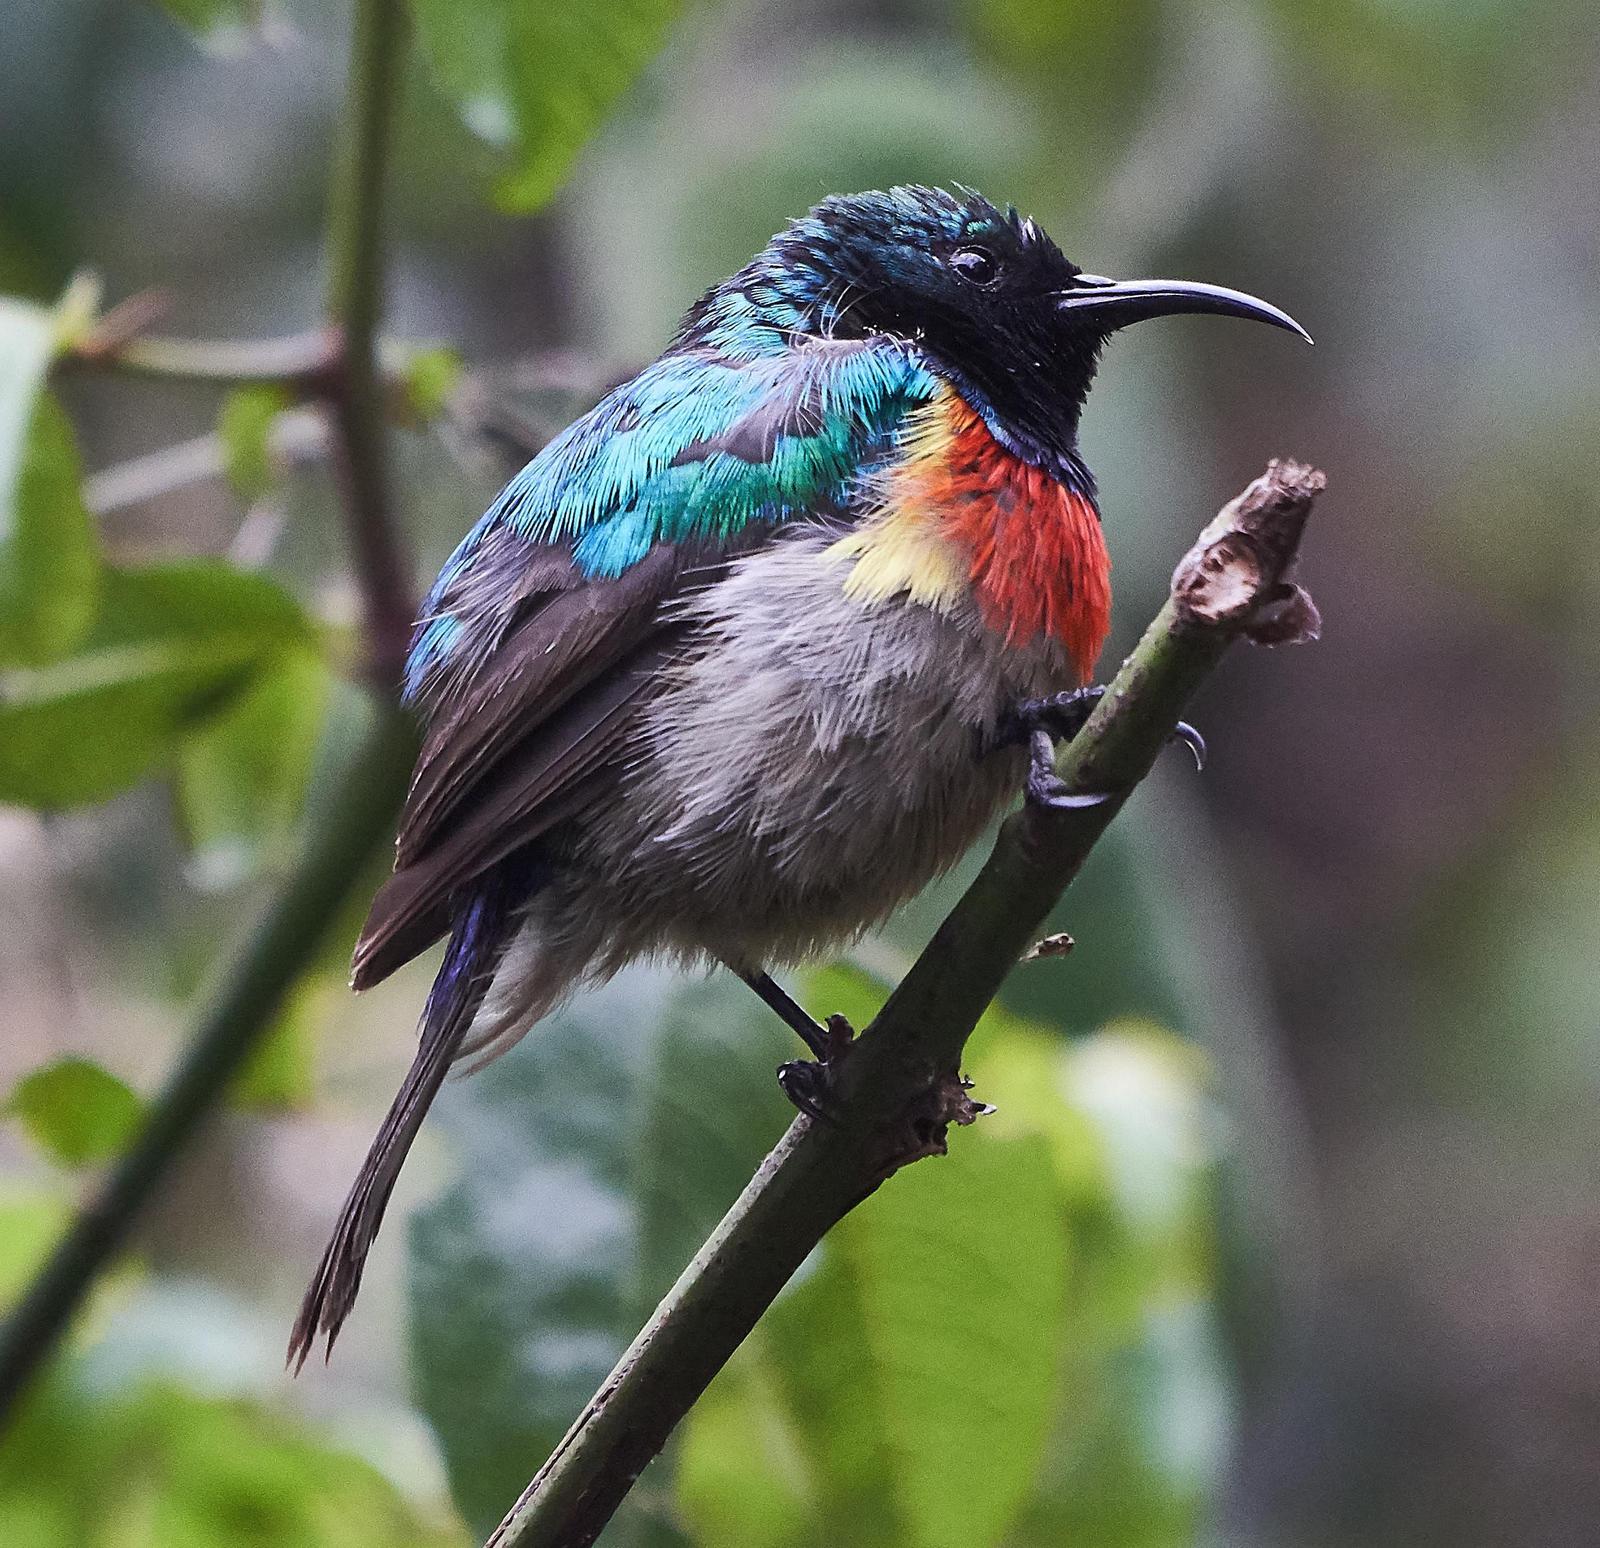 Eastern Double-collared Sunbird Photo by Steven Cheong